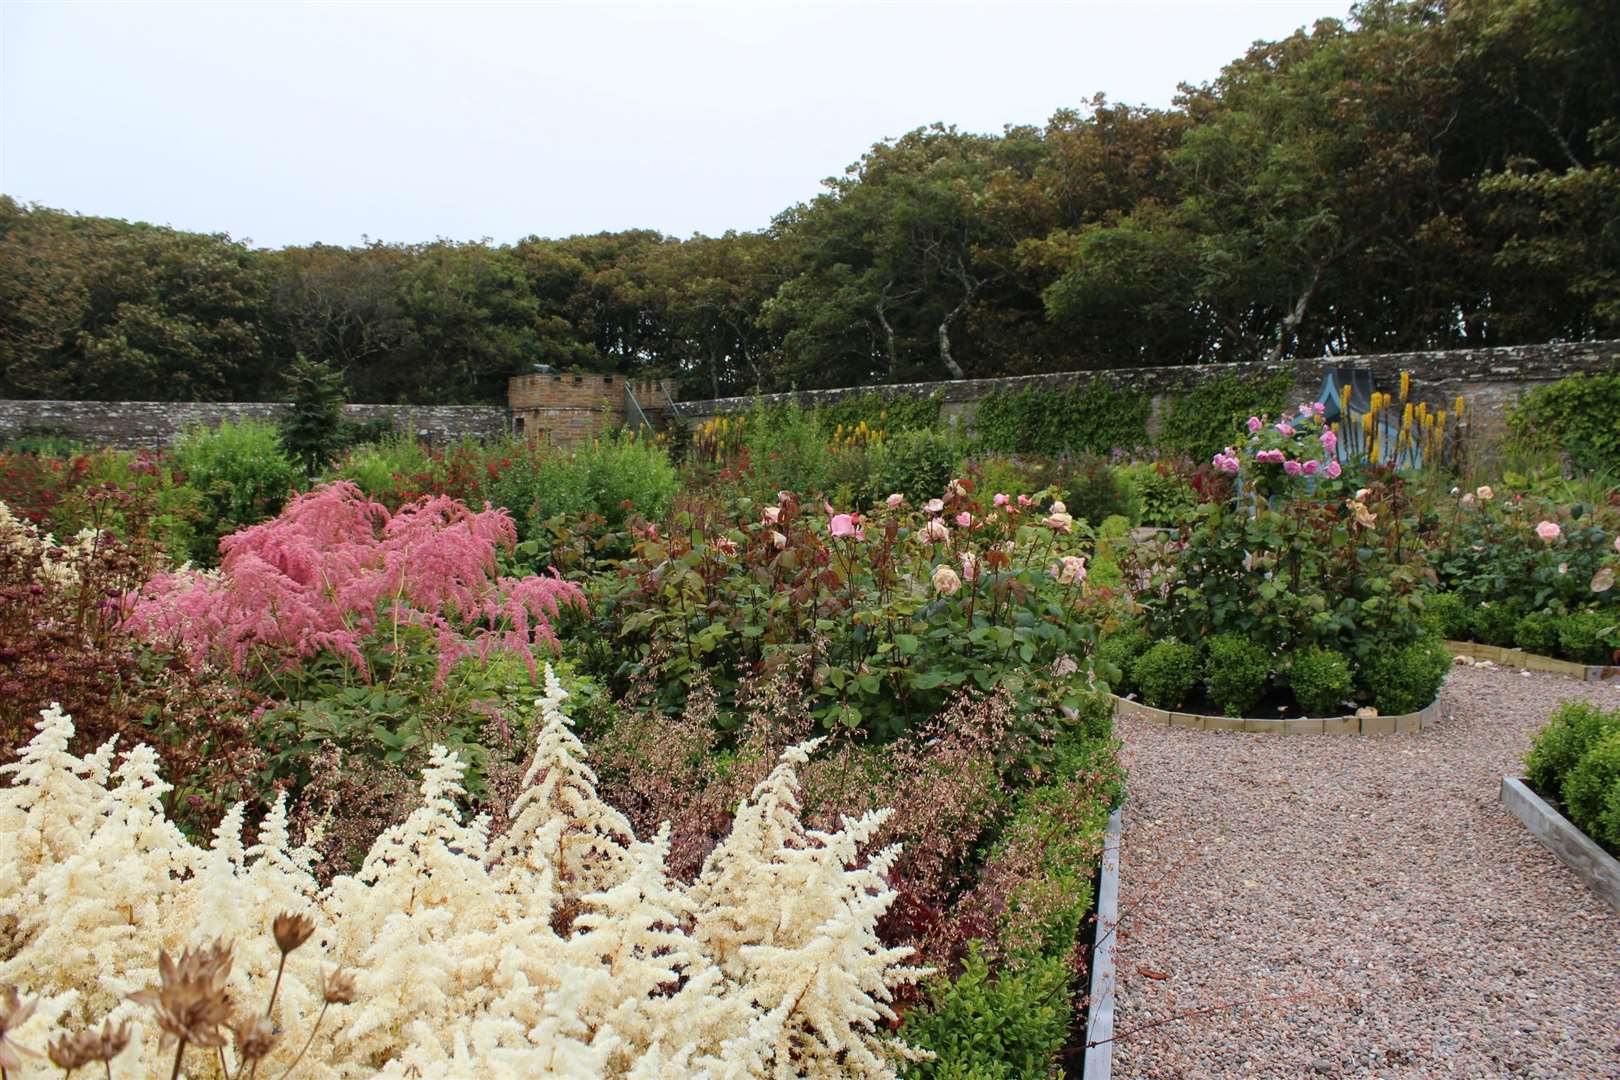 Another colourful view of the gardens of Mey.